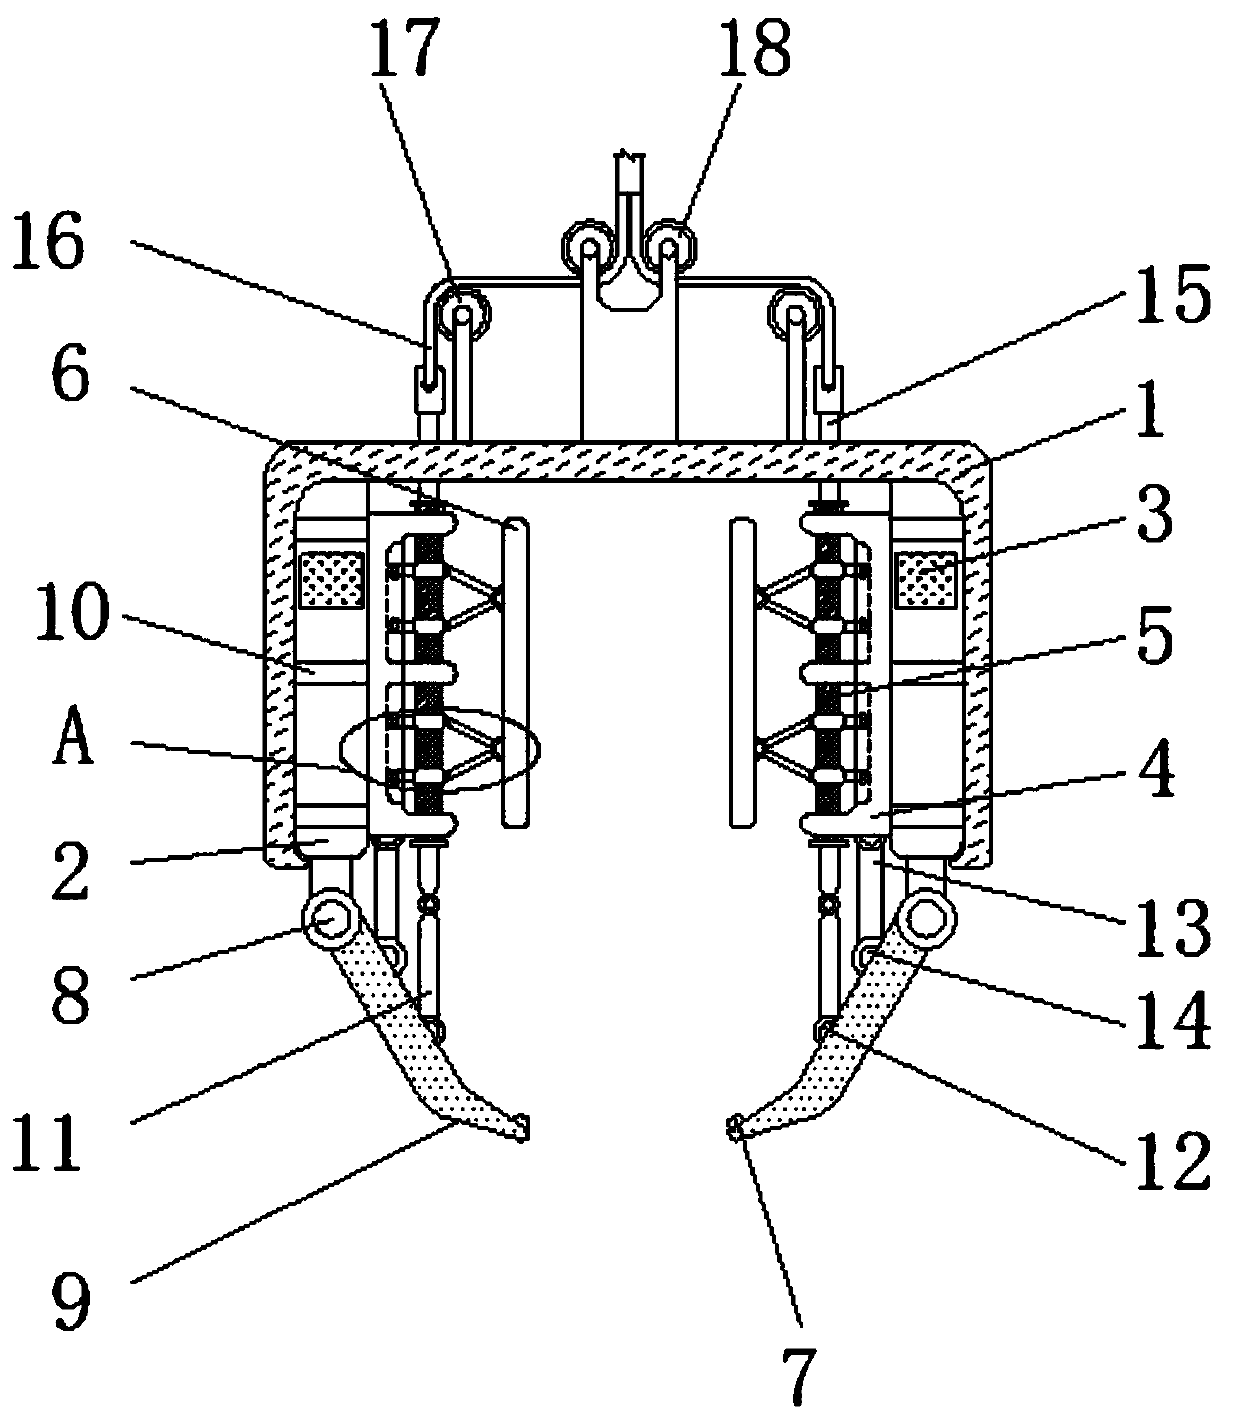 An anti-loosening clamping device for stacking cranes